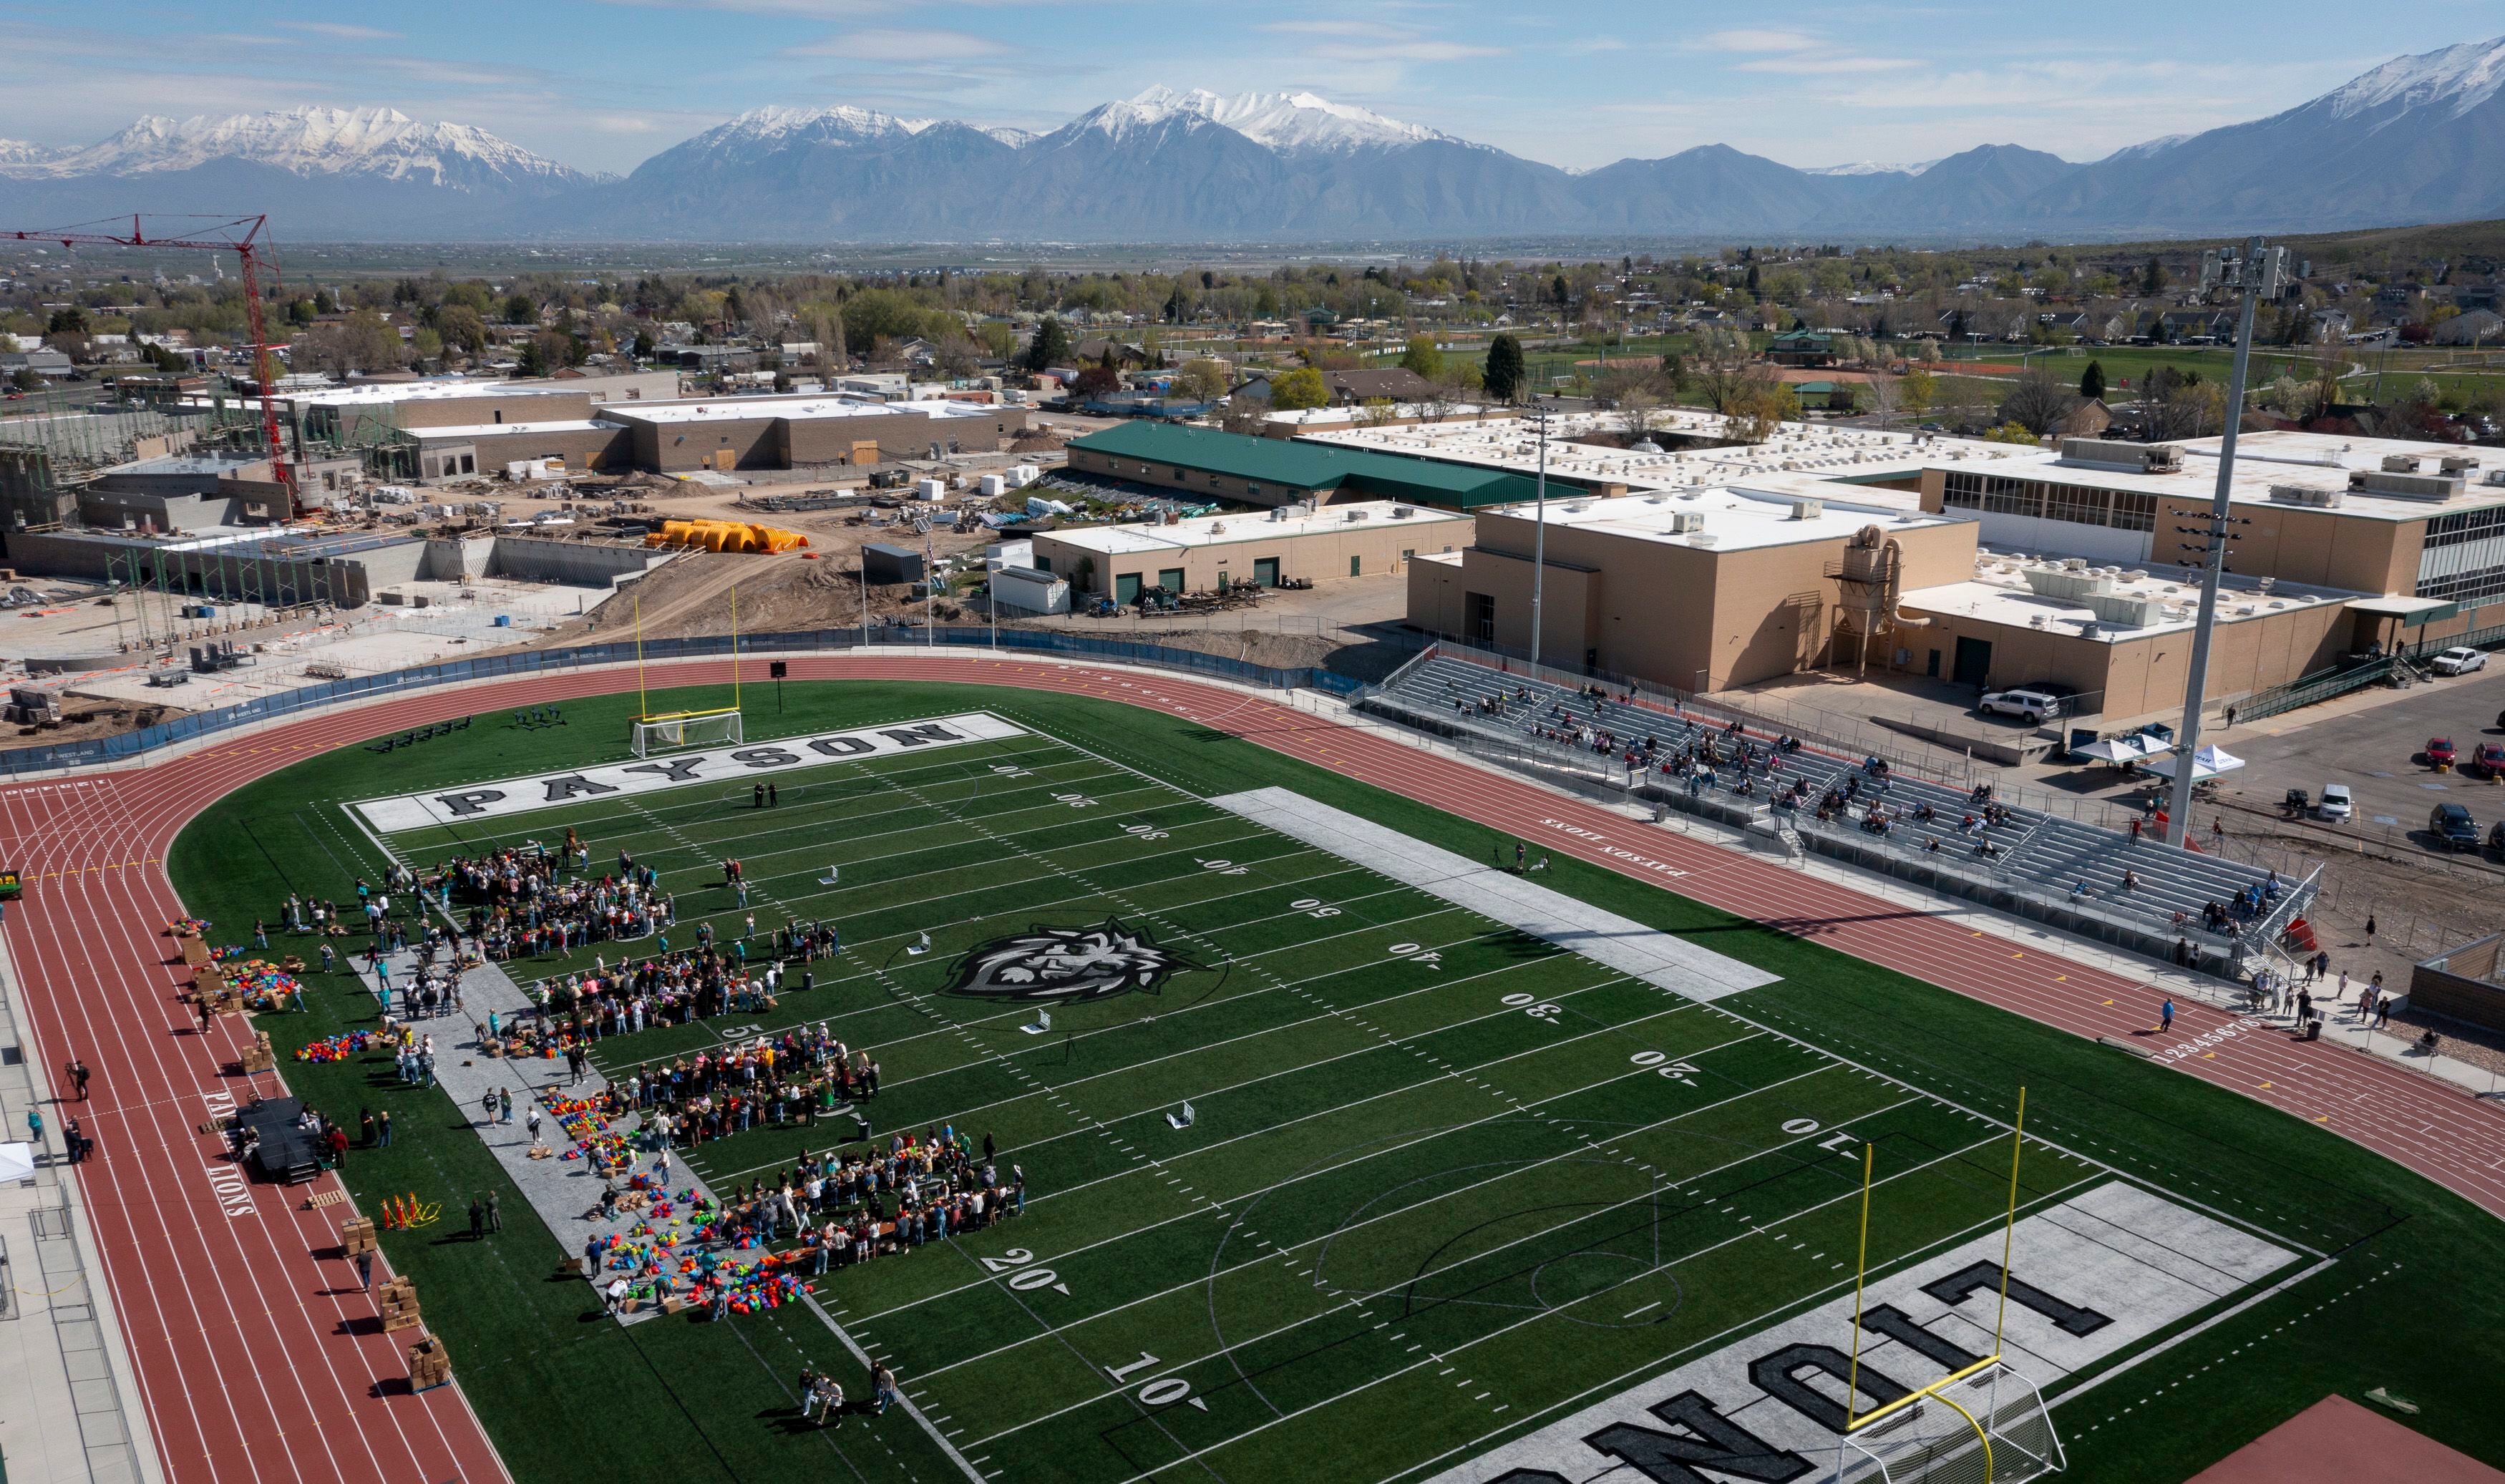 (Bethany Baker  |  The Salt Lake Tribune) Students and volunteers pack resource kits for Kevin Bacon’s nonprofit SixDegrees at a charity event to commemorate the 40th anniversary of the movie “Footloose” on the football field of Payson High School in Payson on Saturday, April 20, 2024.